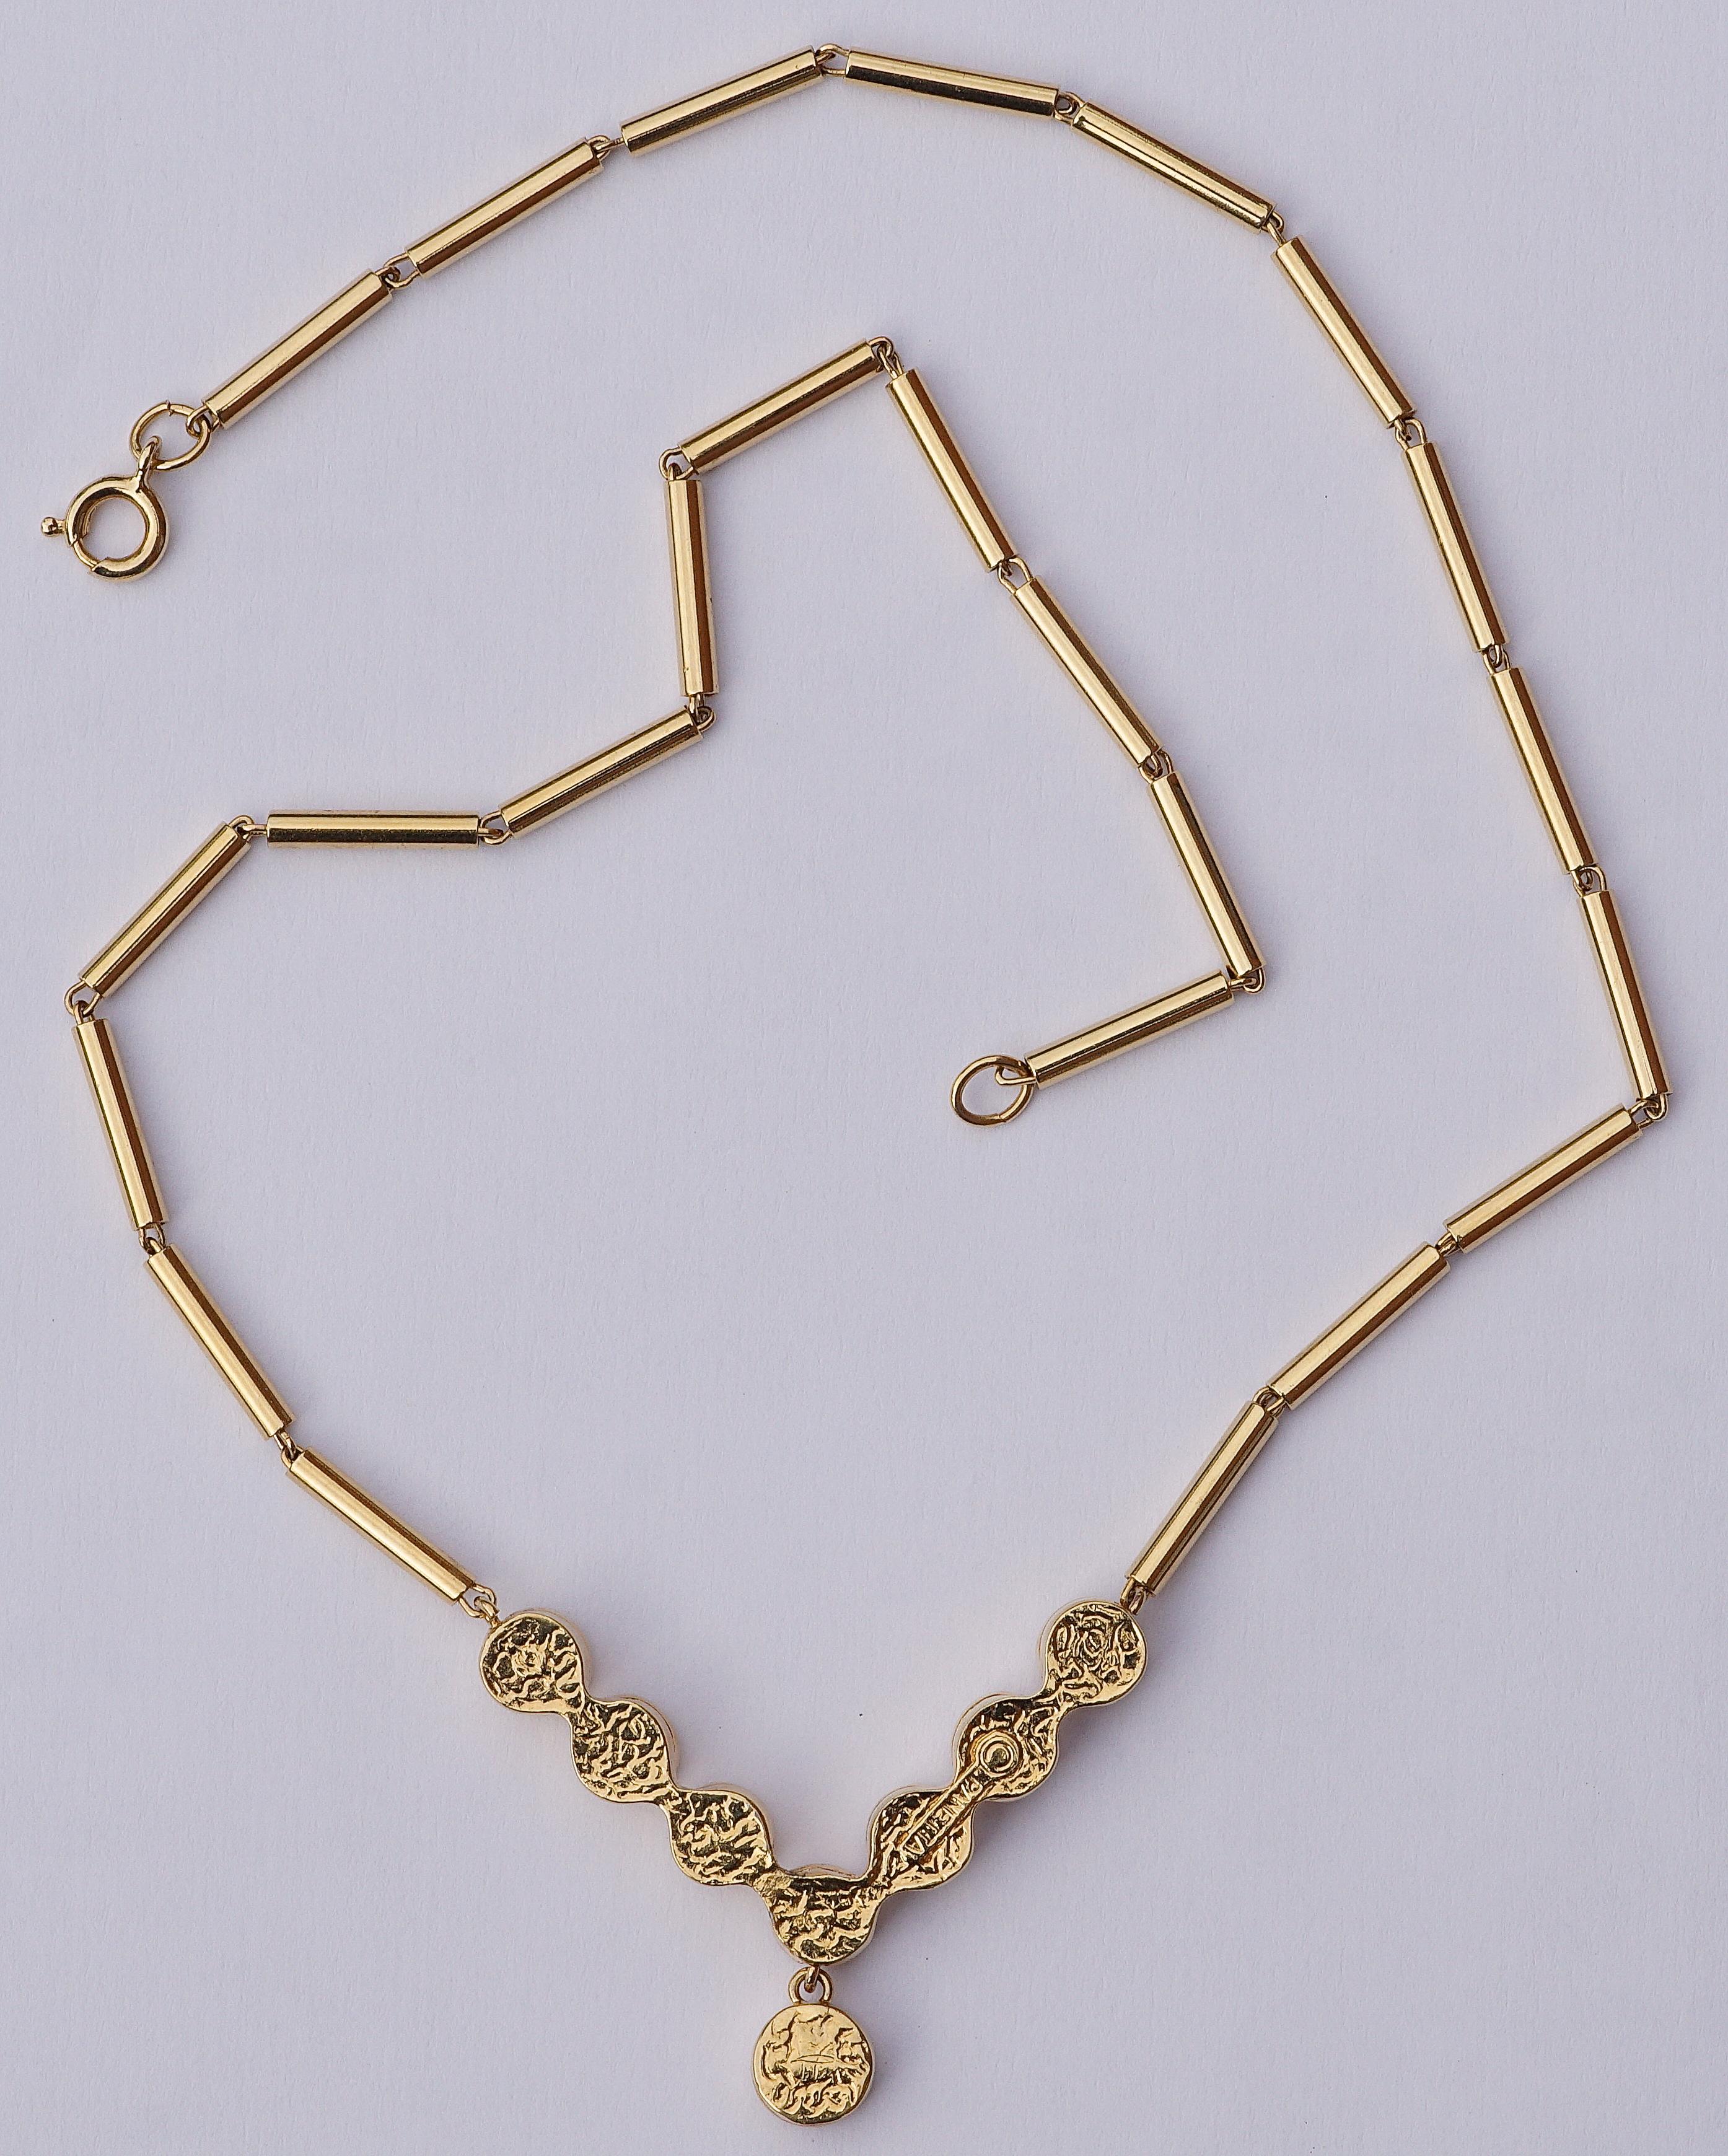 Luxurious Panetta gold tone necklace featuring seven glittering faux diamonds, and a slightly larger faux diamond drop.
The unusual chain is designed with linked golden tubes. Length 40cm / 15.75 inches, and the single drop is diameter 7mm / .27